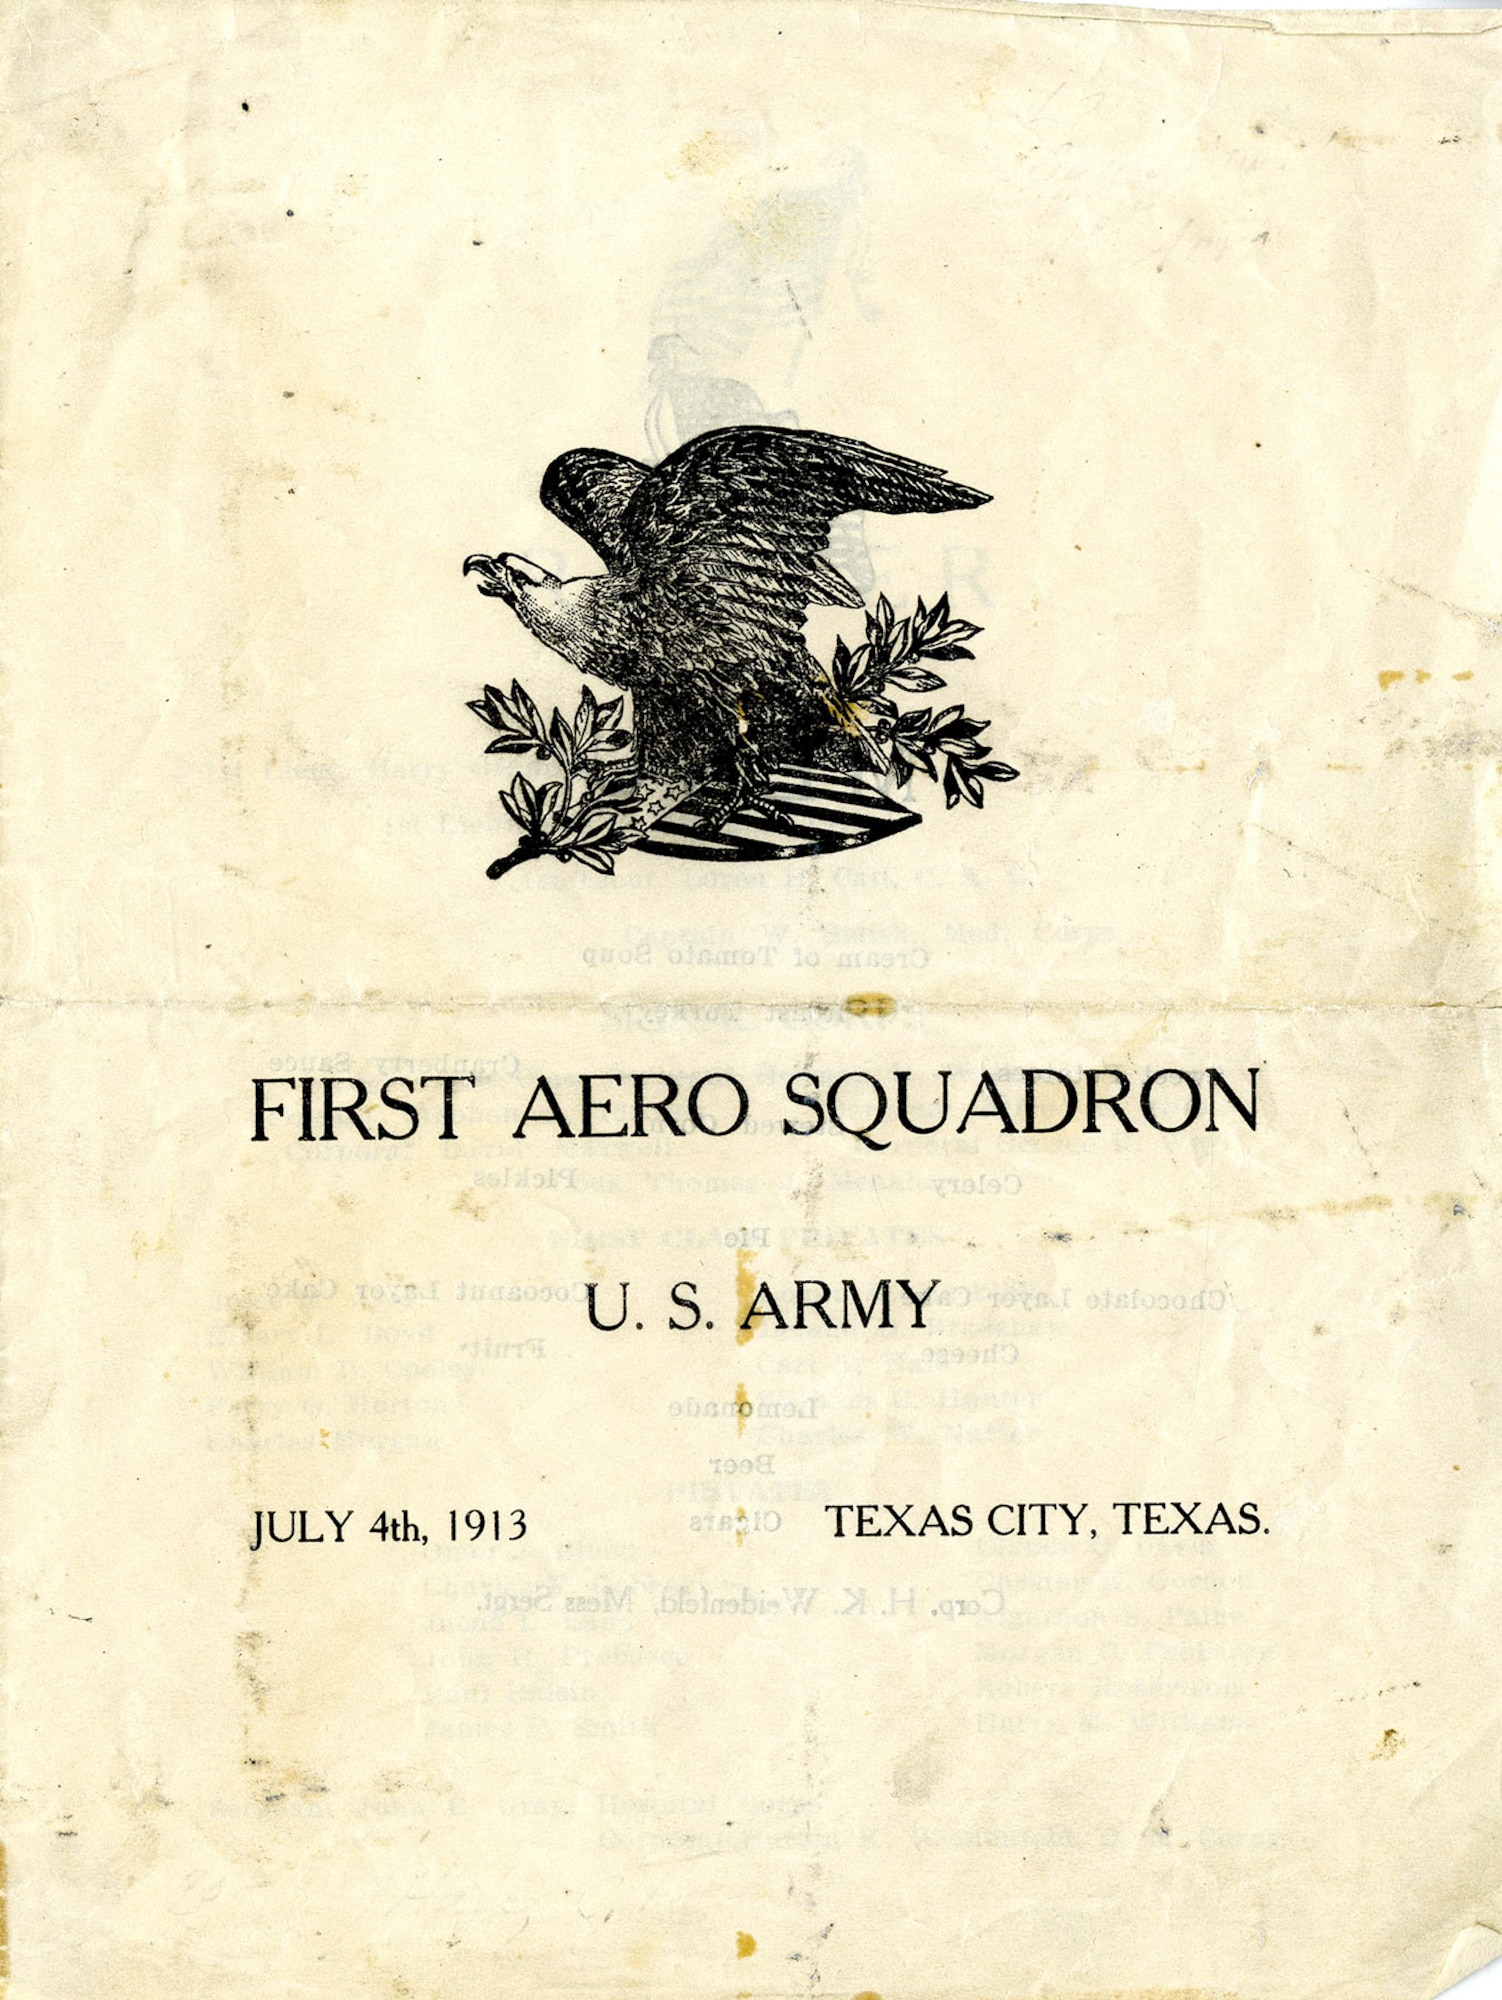 The officers and enlisted men of the 1st Aero Squadron stationed at Texas City, Texas, celebrated the Fourth of July with a special meal. The menu also lists a roster of all the personnel assigned to the United States first operational flying squadron in 1913. (U.S. Air Force photo)